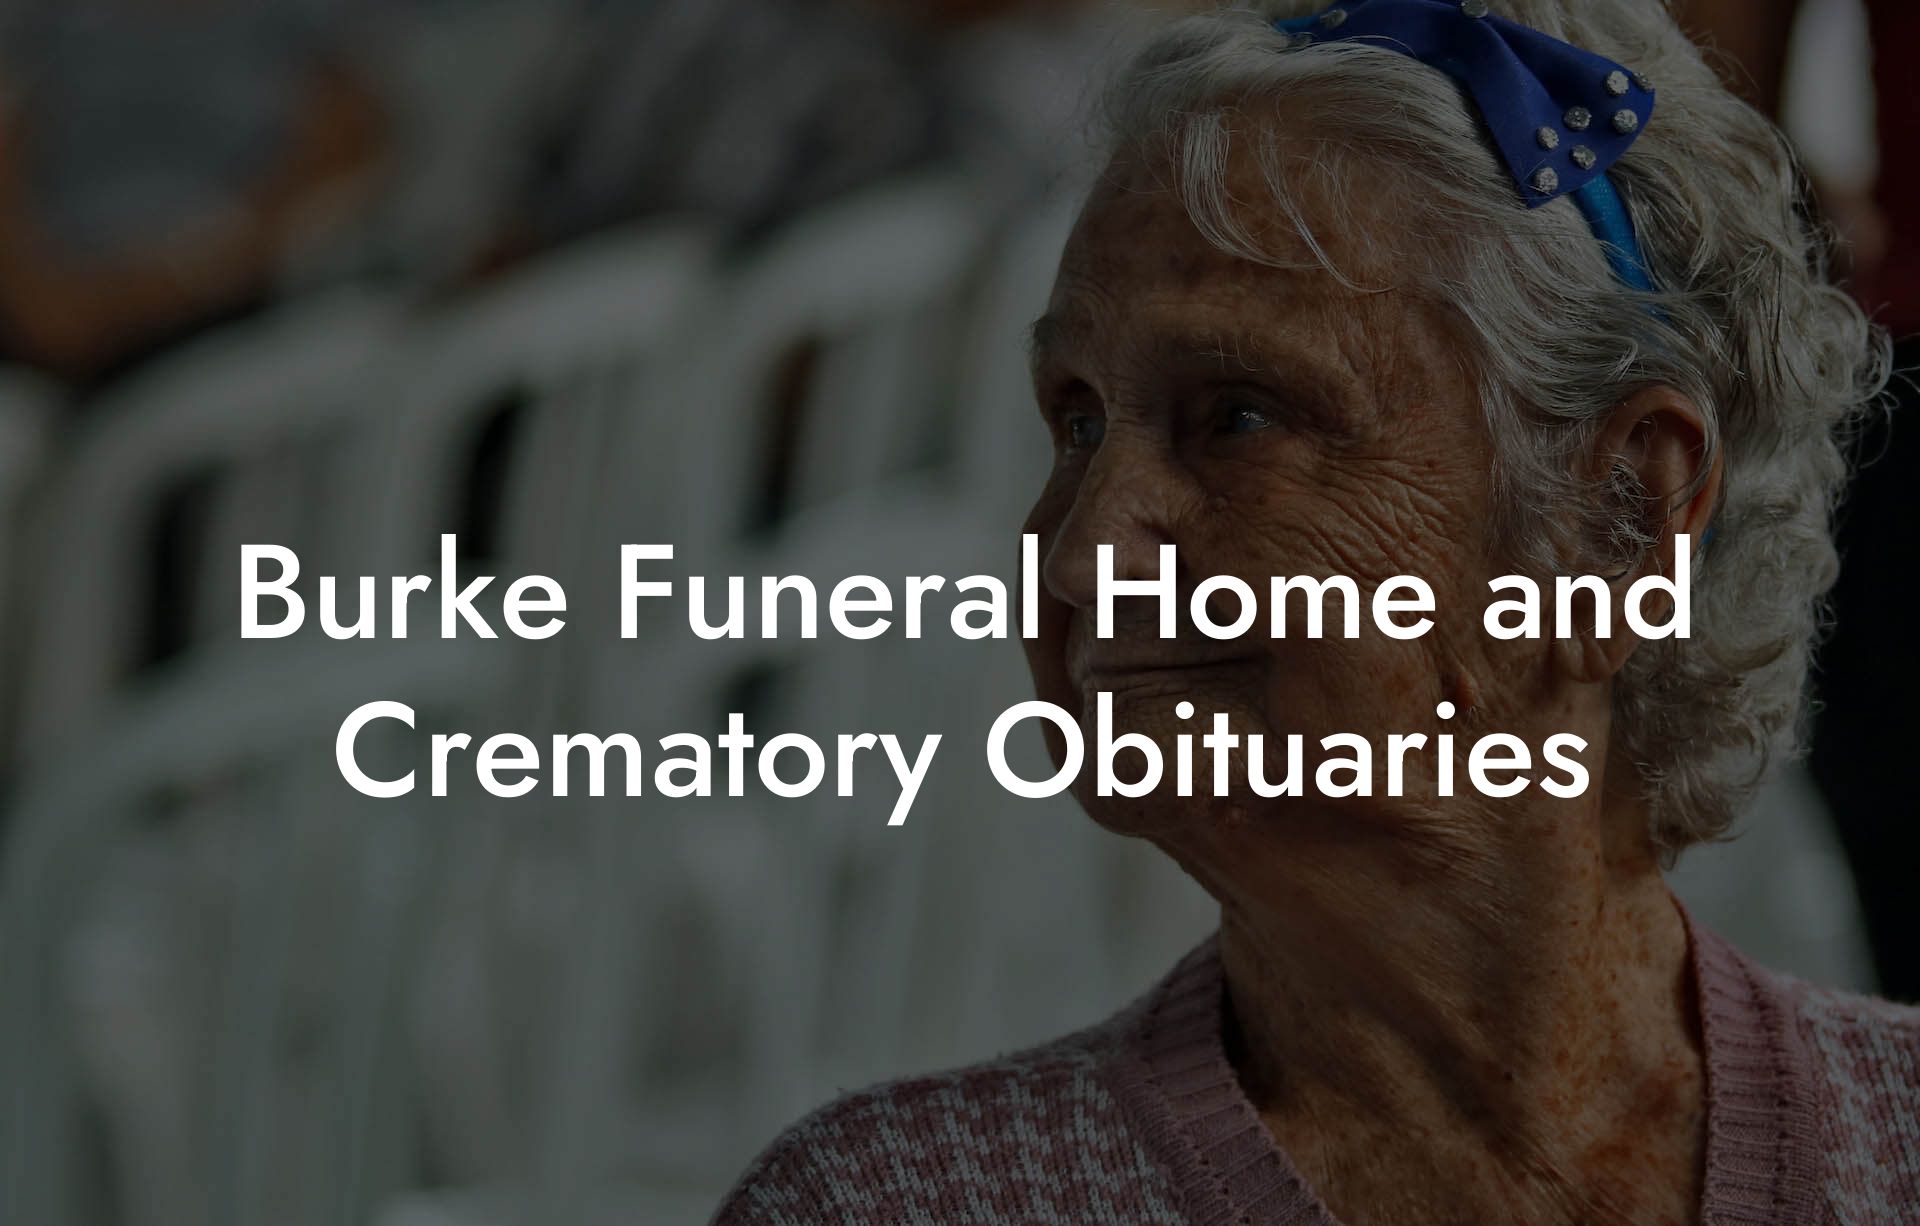 Burke Funeral Home and Crematory Obituaries